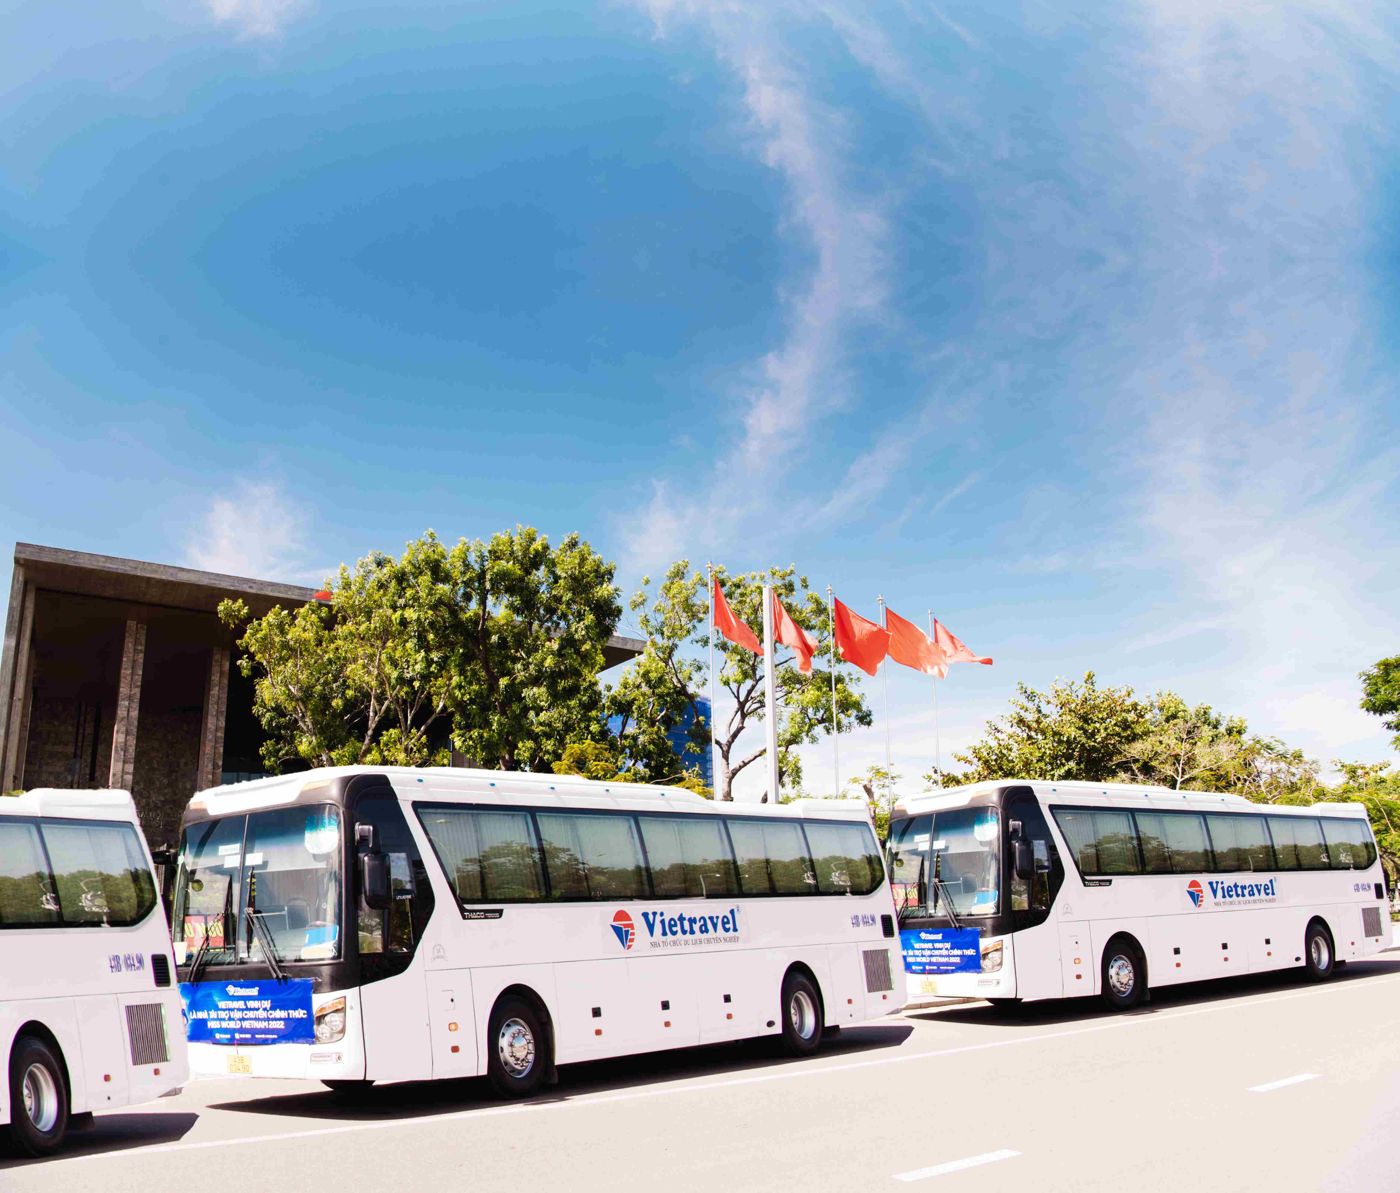 Ha Long Bay Travel Guide - Vietravel's private bus